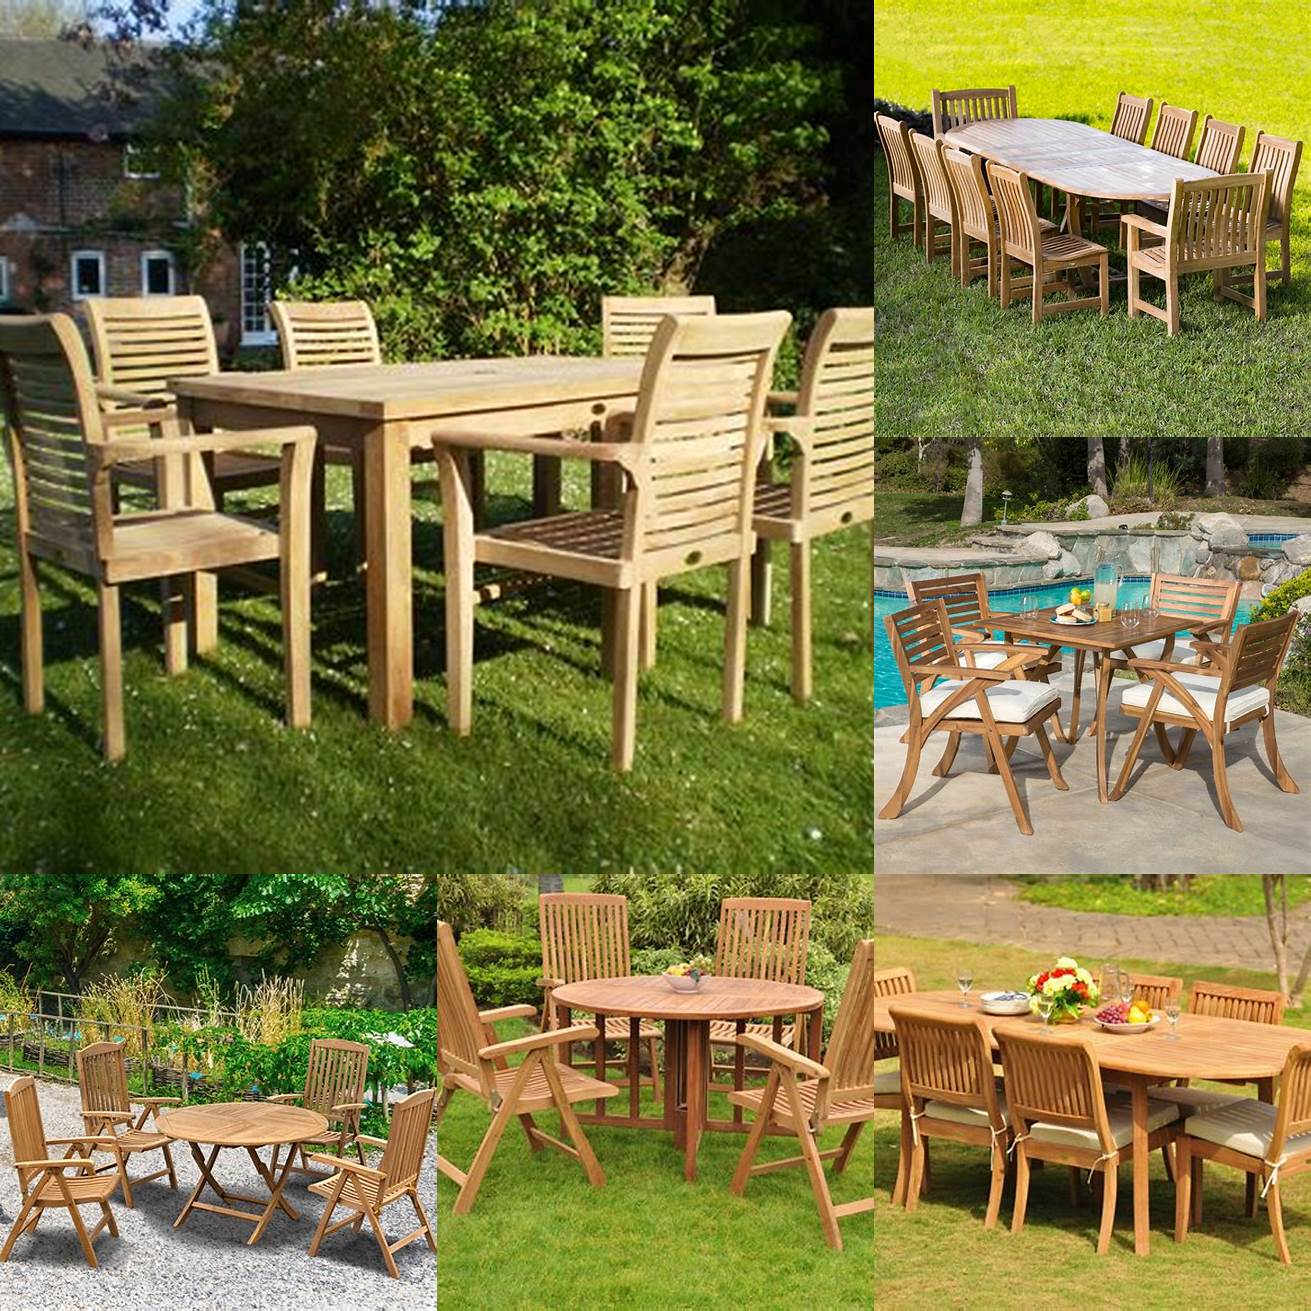 Picture of a person sitting in a teak garden furniture set